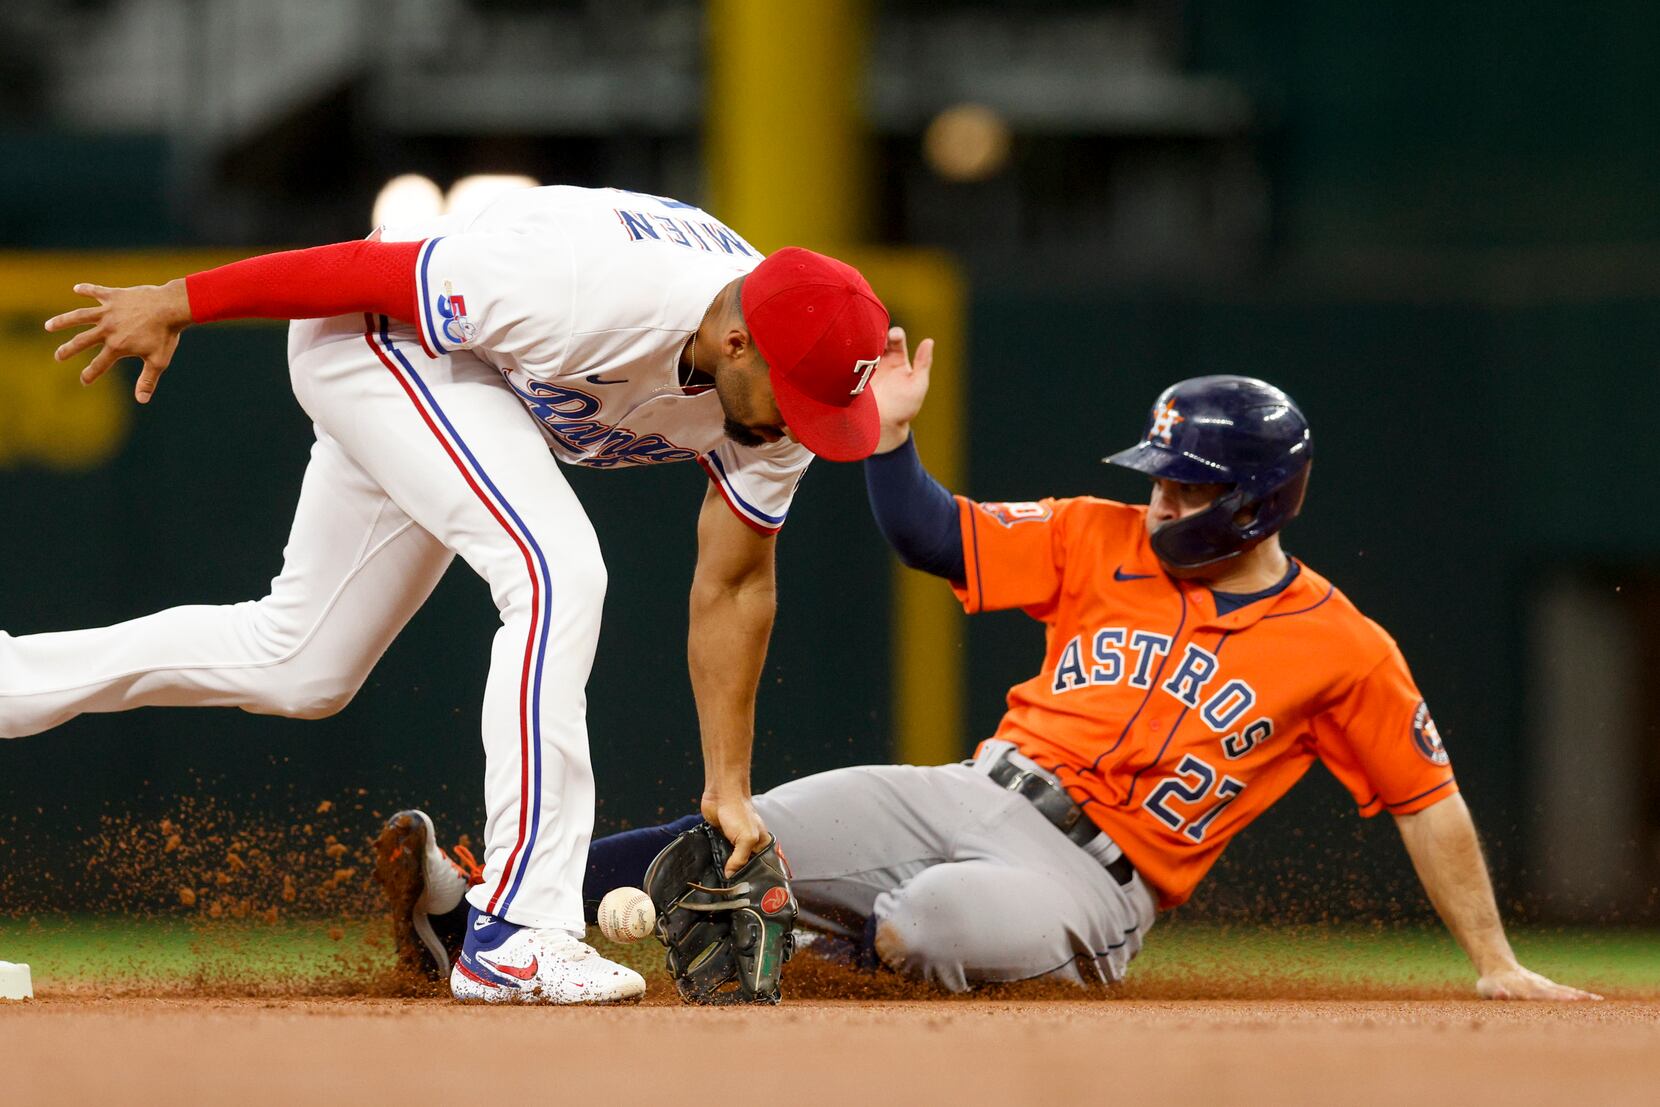 Astros: Longtime players who finished careers elsewhere